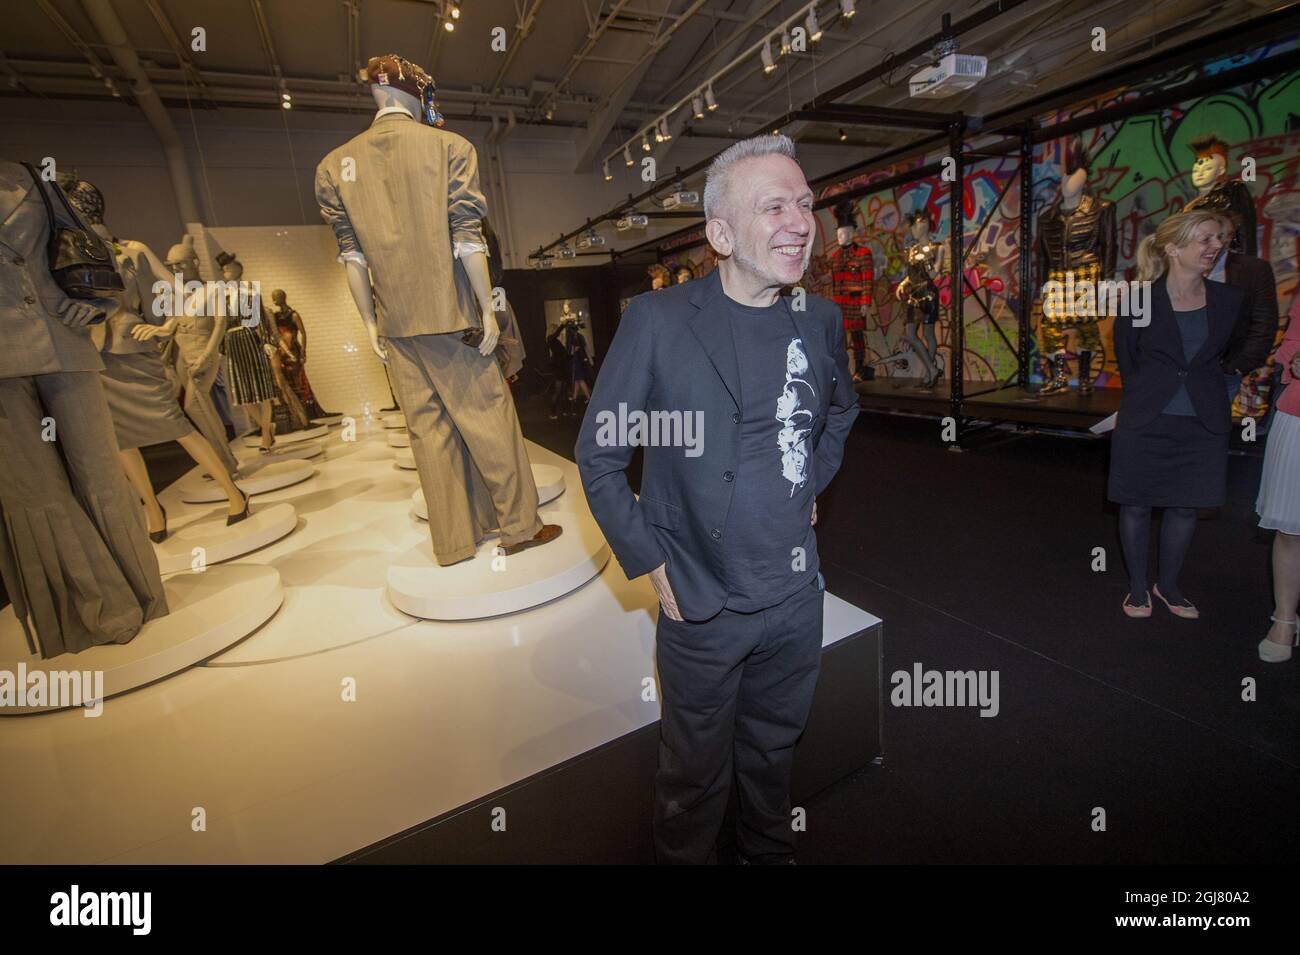 STOCKHOLM 20130613 The French designer Jean-Paul Gaultier at the Architecture and Design Museum in Stockholm, Sweden to inaugurate the exhibition of his works 'The fashion world of Jean Paul Gaultier from the sidewalk to the catwalk'. Jean Paul wearing an ABBA t-shirt that he bought at the new ABBA museum. Foto: Fredrik Sandberg / SCANPIX / Kod 10080  Stock Photo